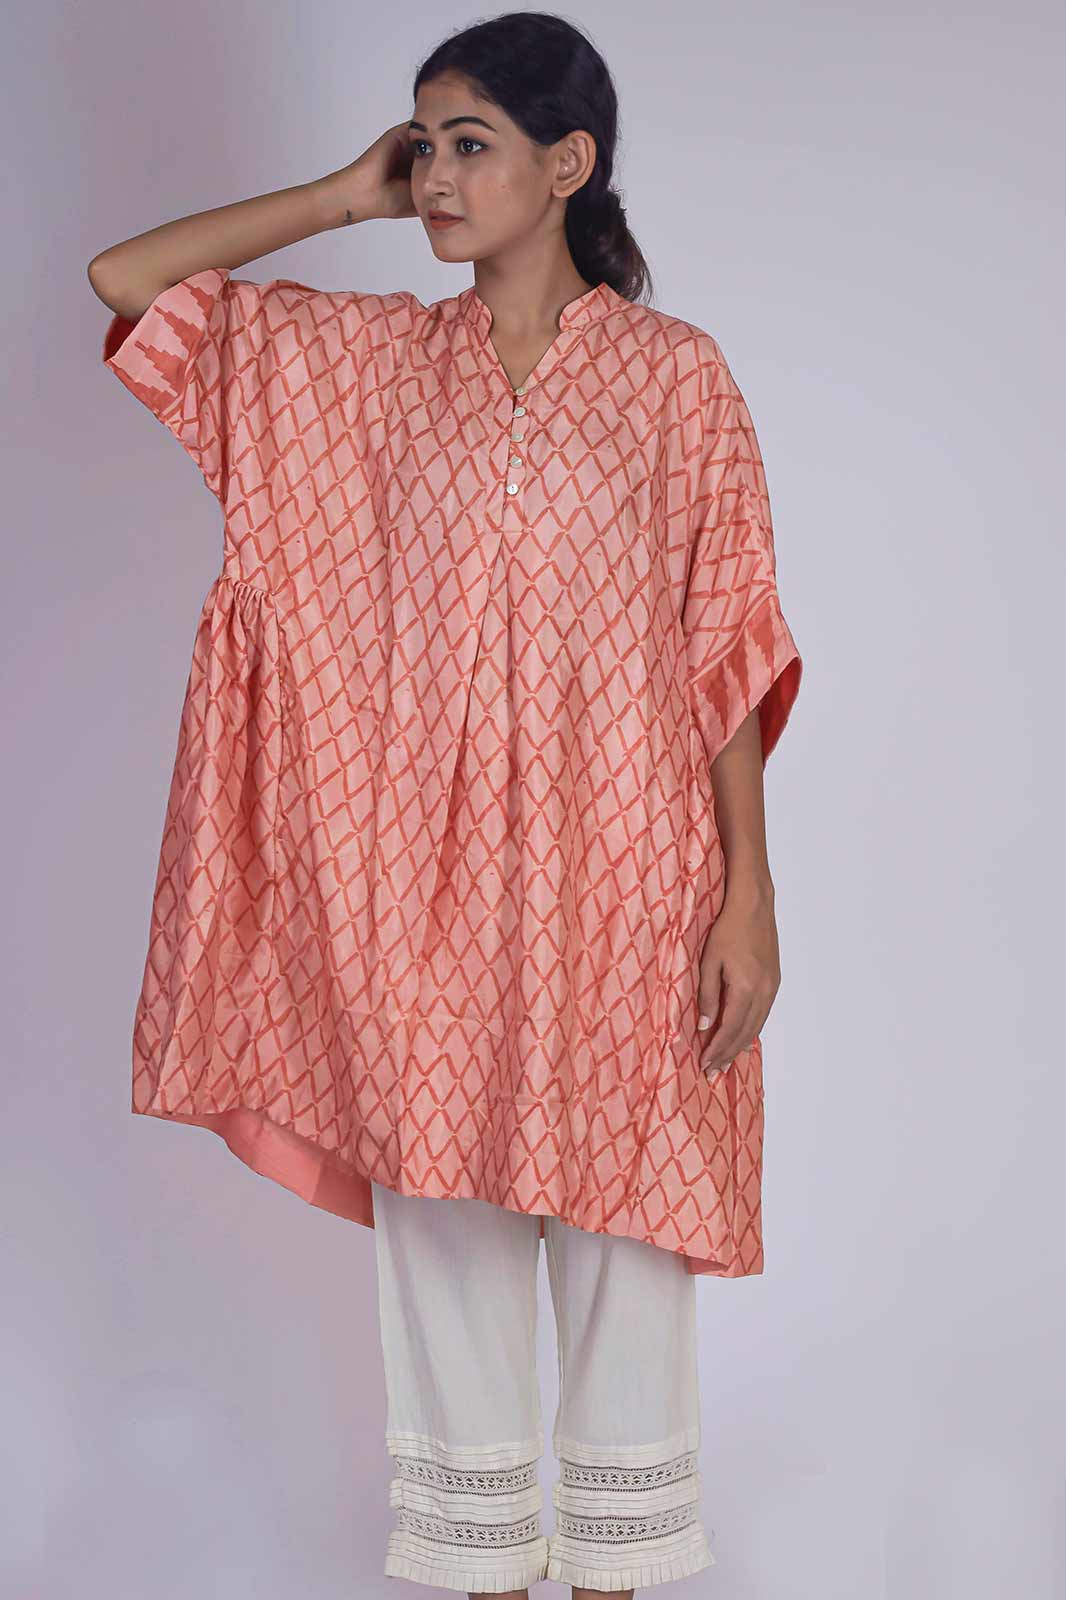 Sepia stories, Online Clothing store, Indian designer brand, women tops online, women clothing online store, handmade women tops, cotton women tops, ladies tops, eco-friendly women clothing, natural fabric, sustainable clothing women, women tops, buy women tops, buy ladies tops, earthroute brand, muslin tops, handwoven tops, handwoven clothing, cotton tops, linen shirts, women linen tops, Designer handmade tops, women shirts, women wear online